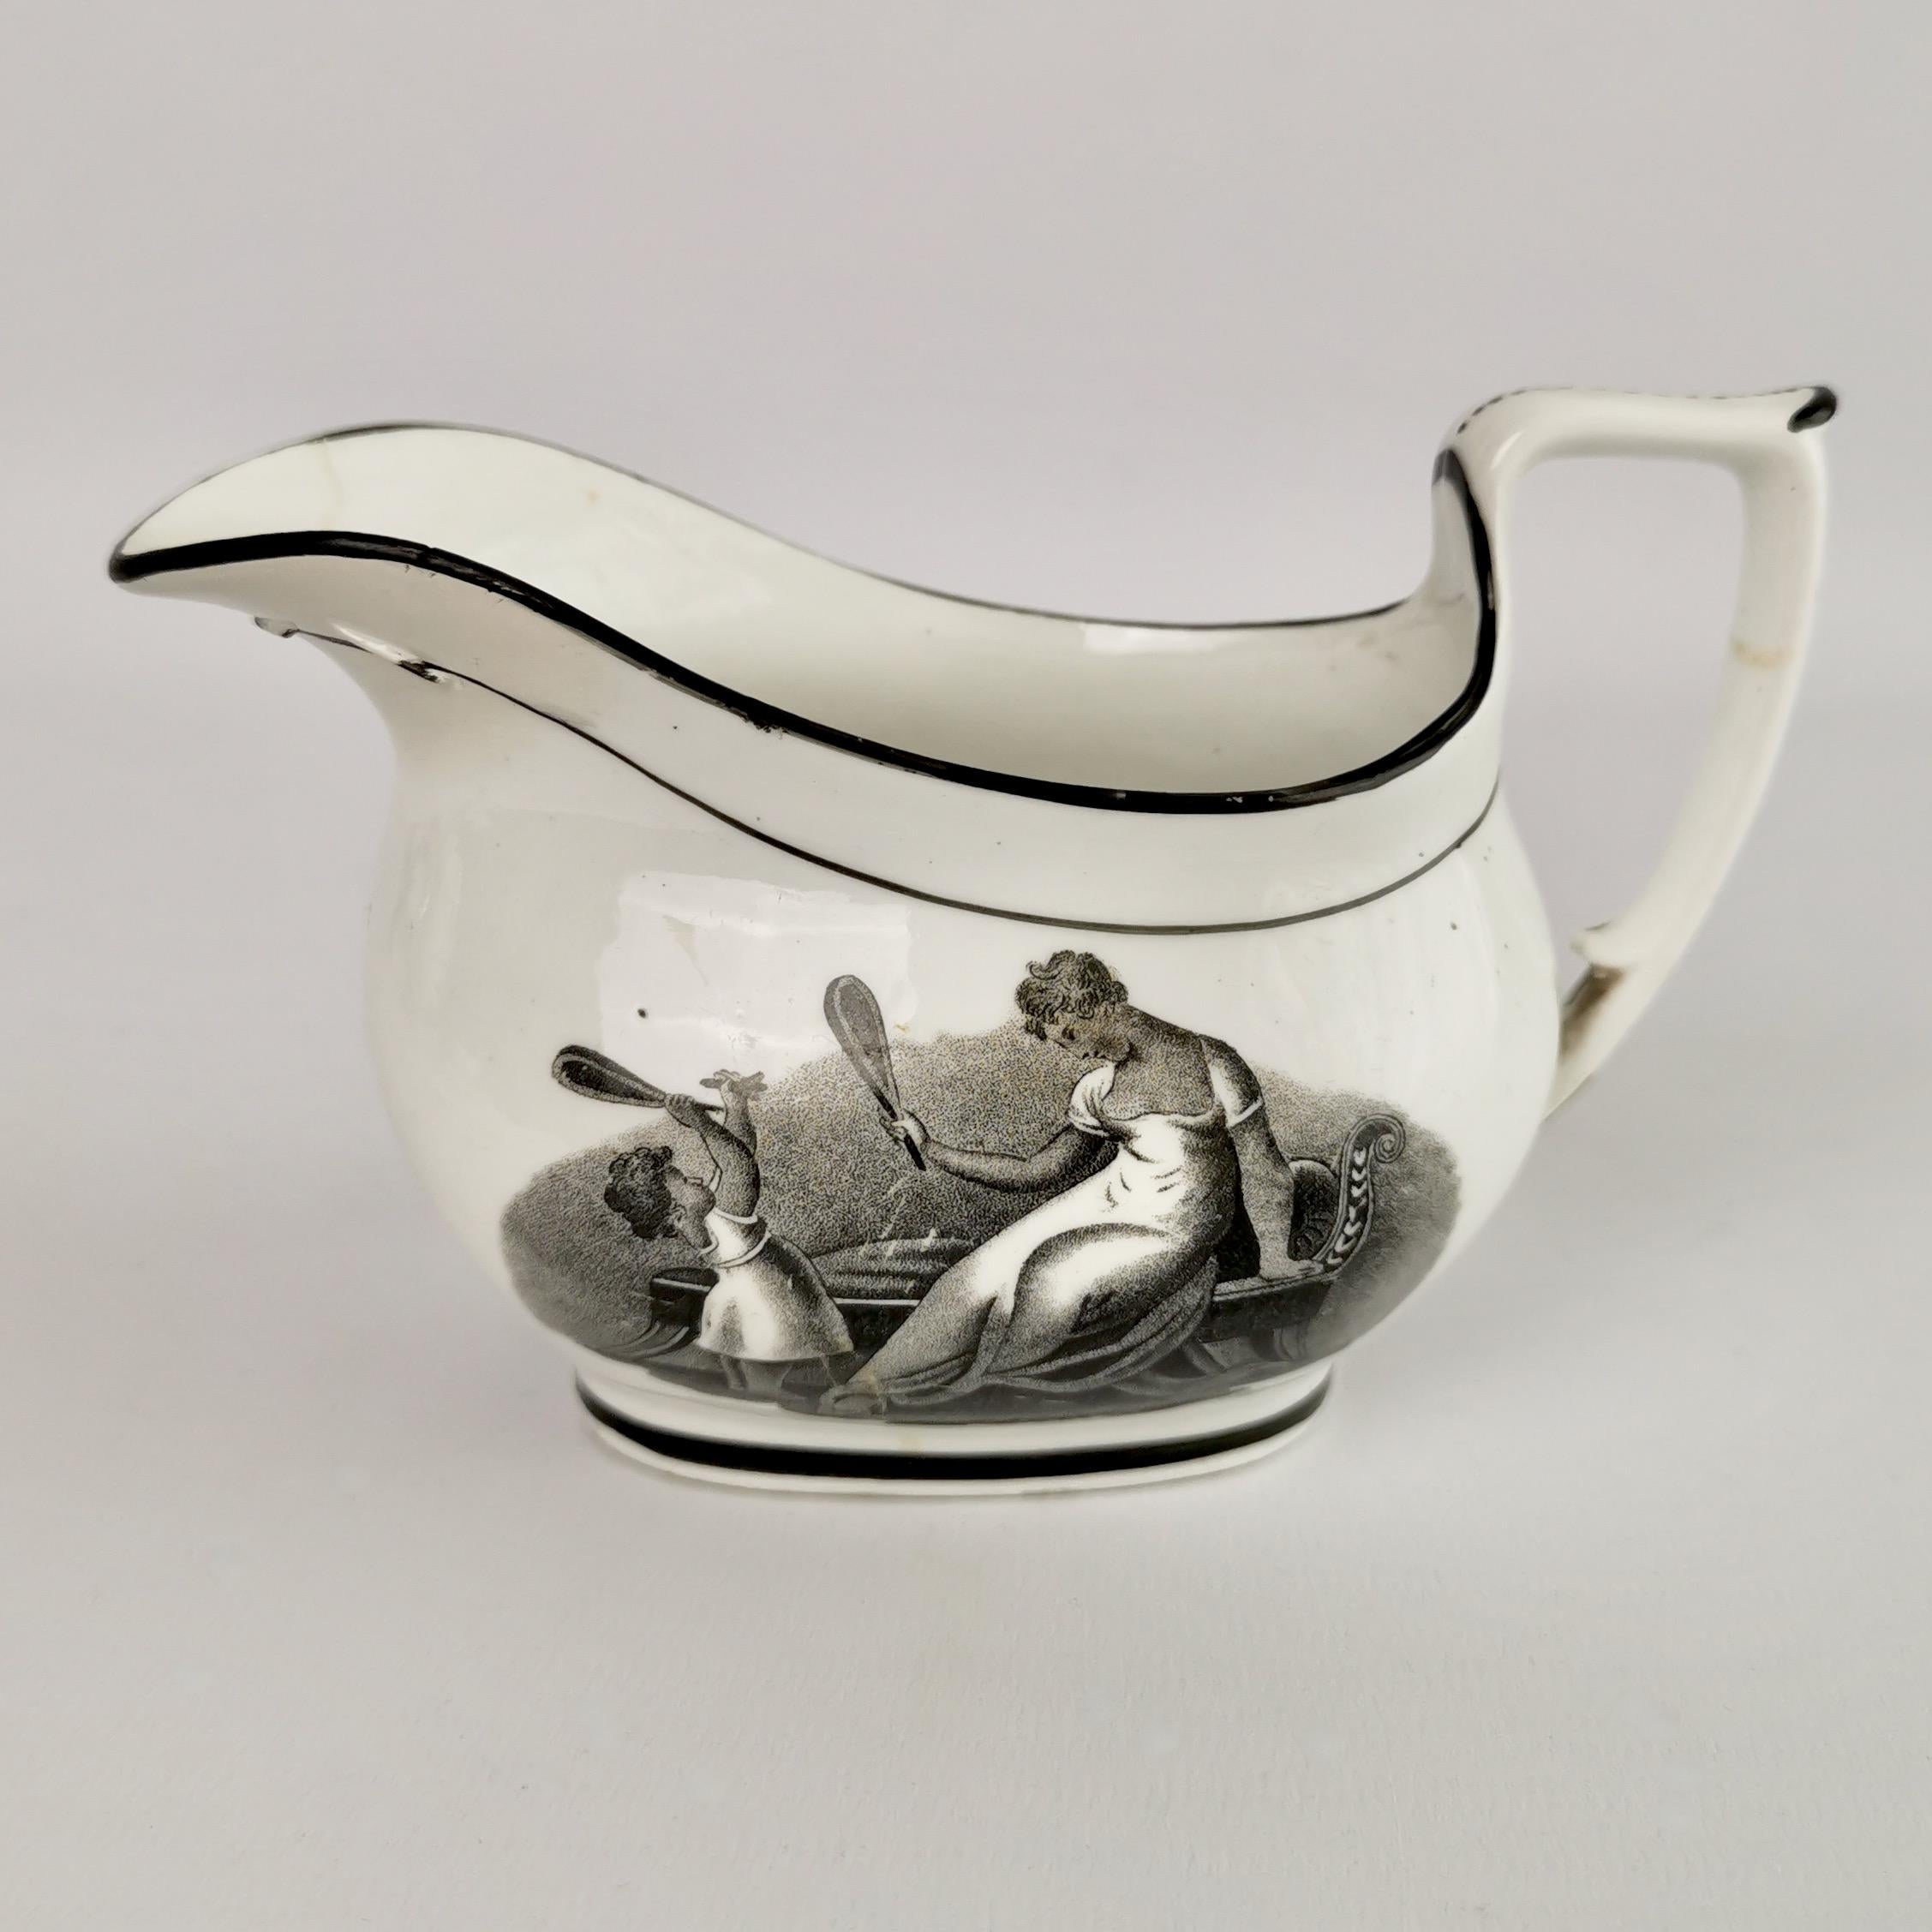 Neoclassical New Hall Tea Coffee Service, Black White Bat Printed Muses, Neo-Classical, 1815